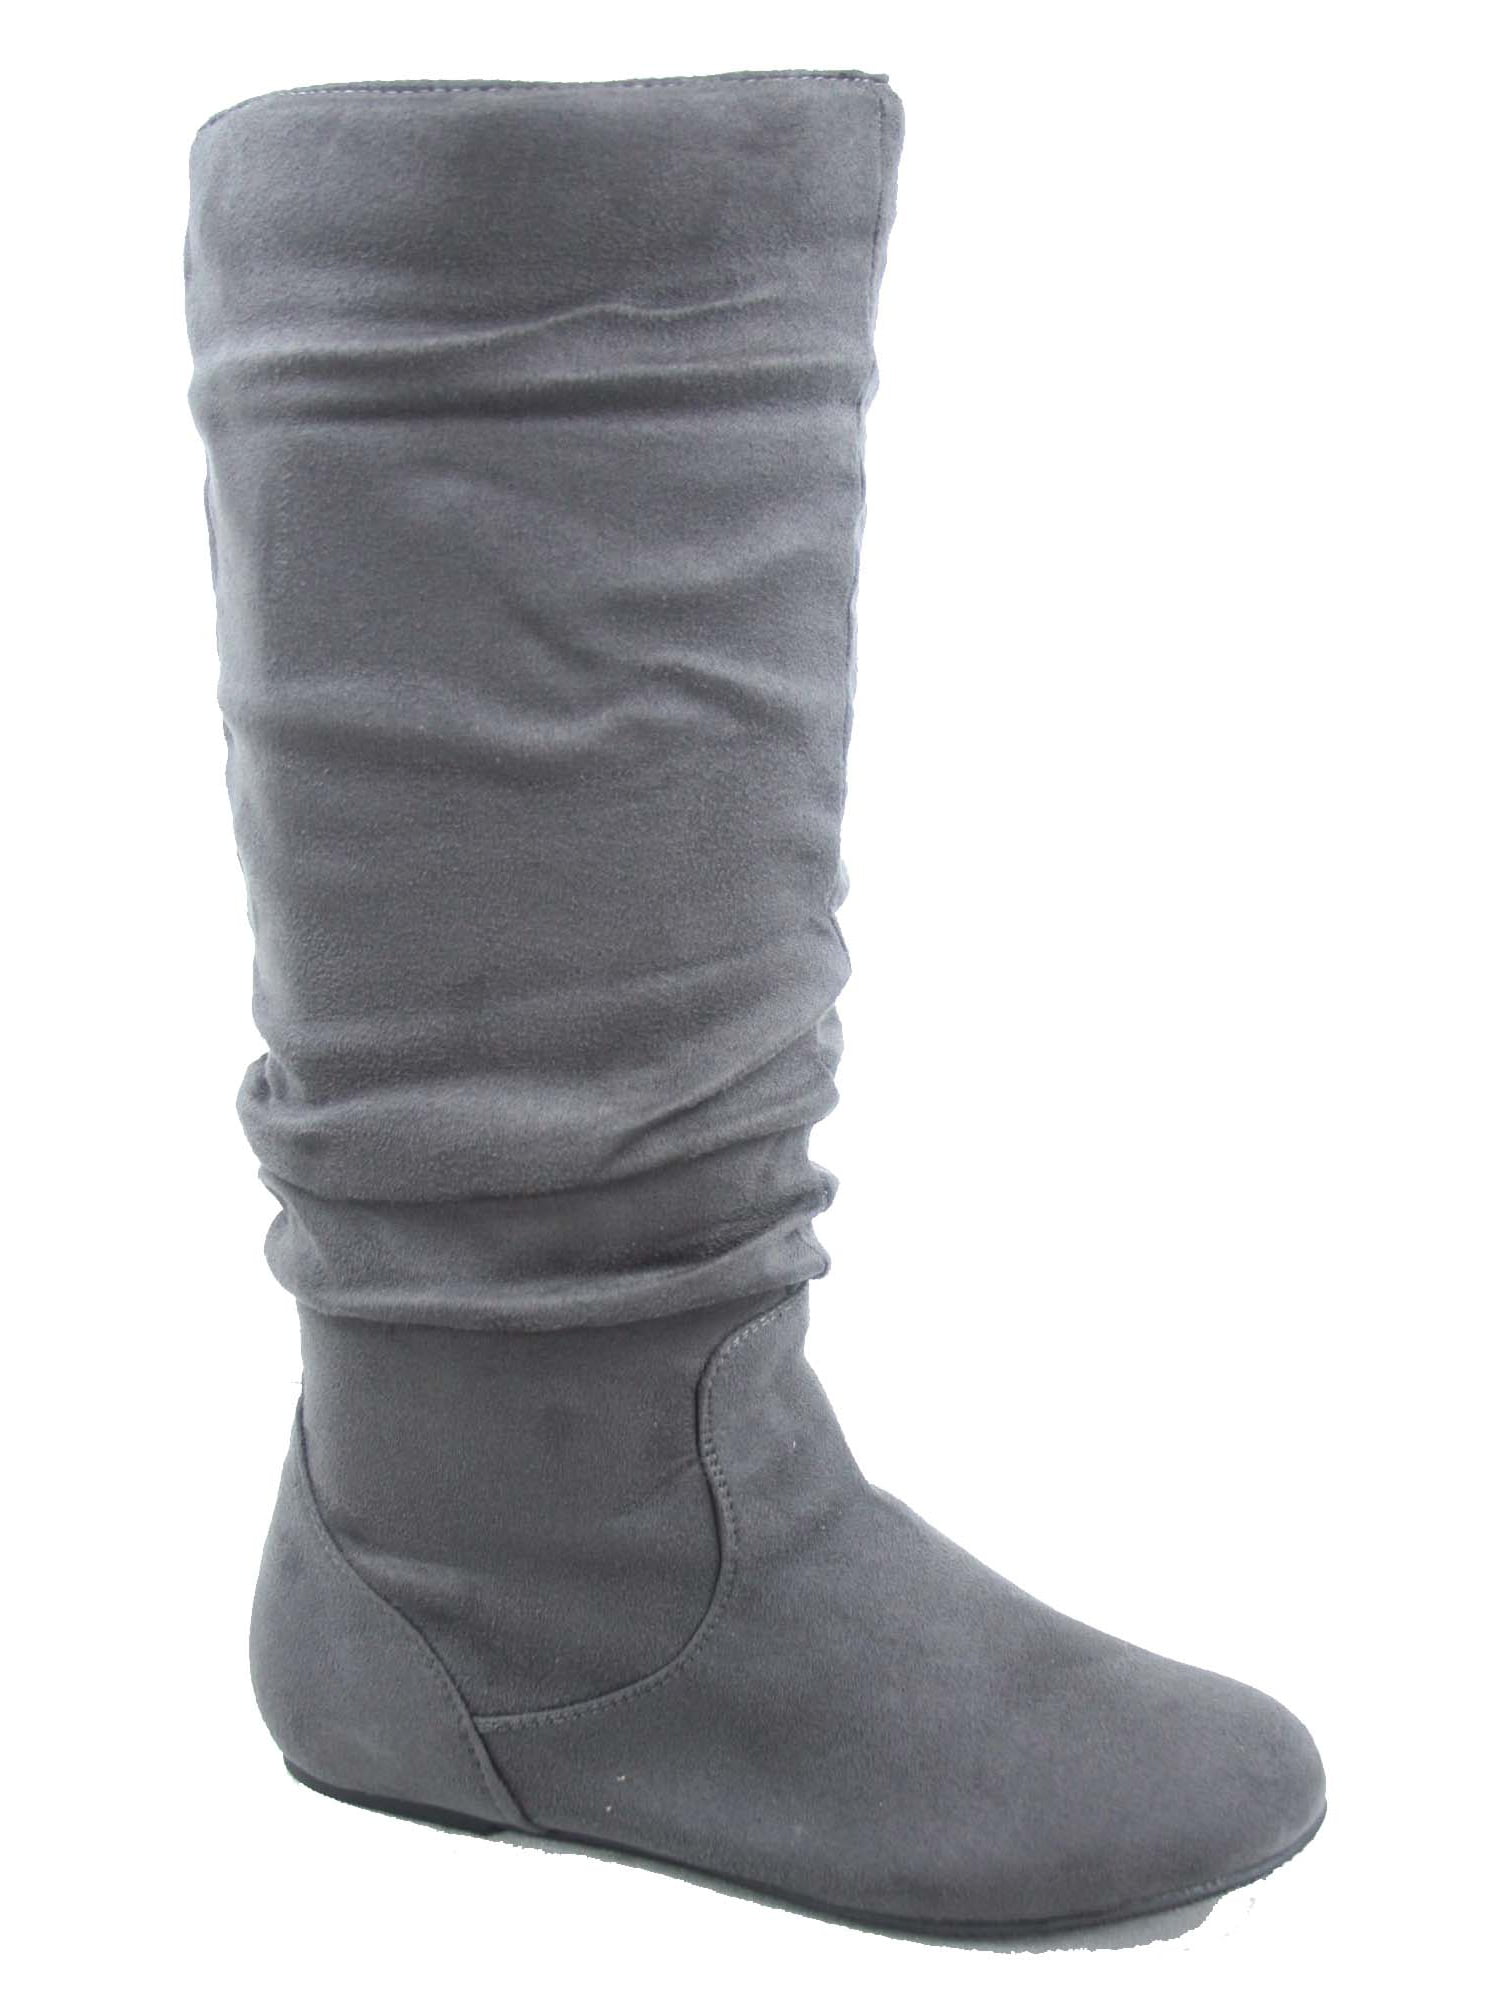 Women's Cute & Comfort Round Toe Flat Slouchy Mid Calf Knee High Boot Size 5-10 